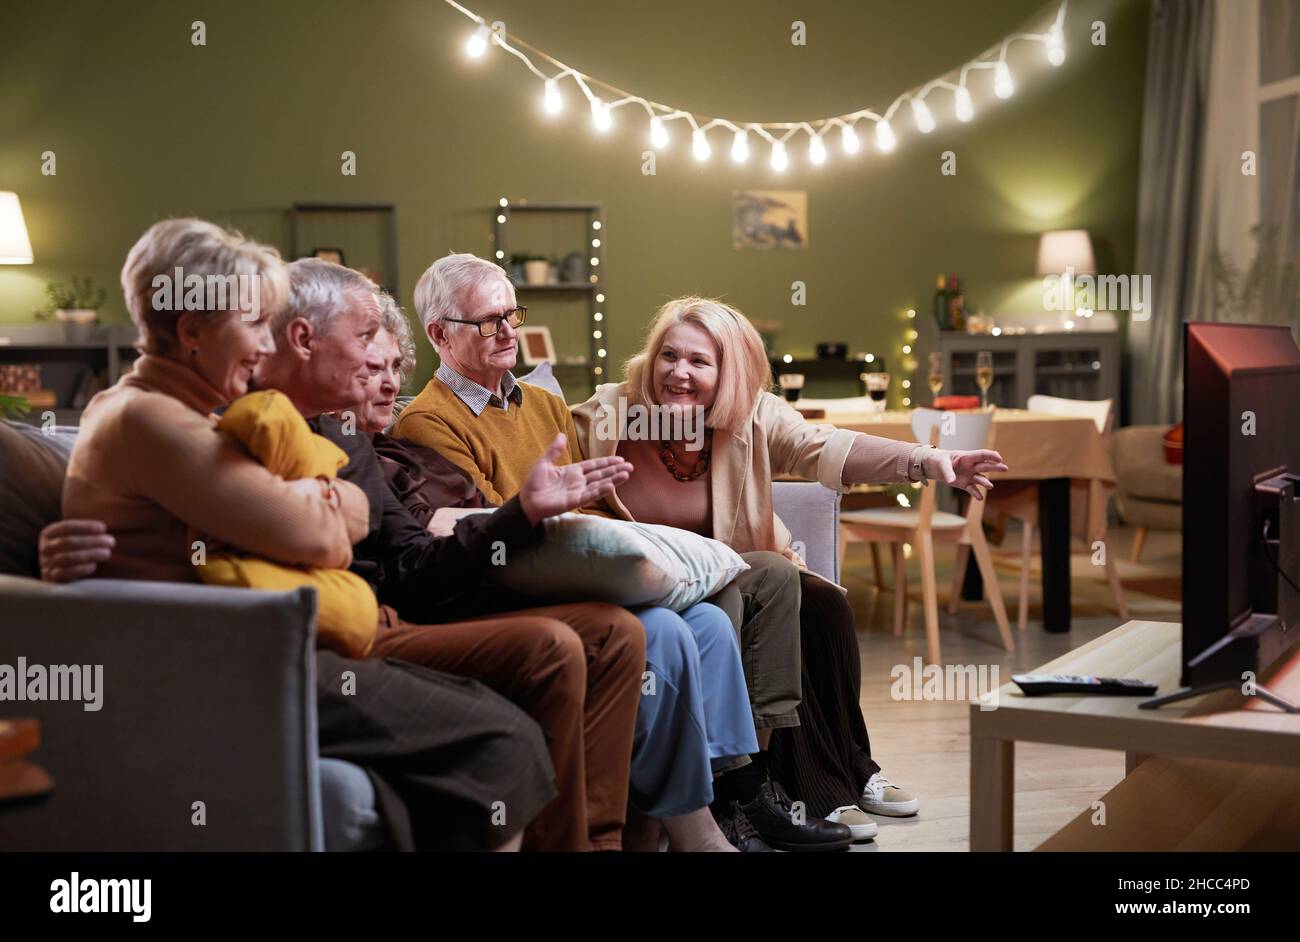 Two aged men and three women sitting together on couch in front of TV, watching interesting movie and discussing it Stock Photo